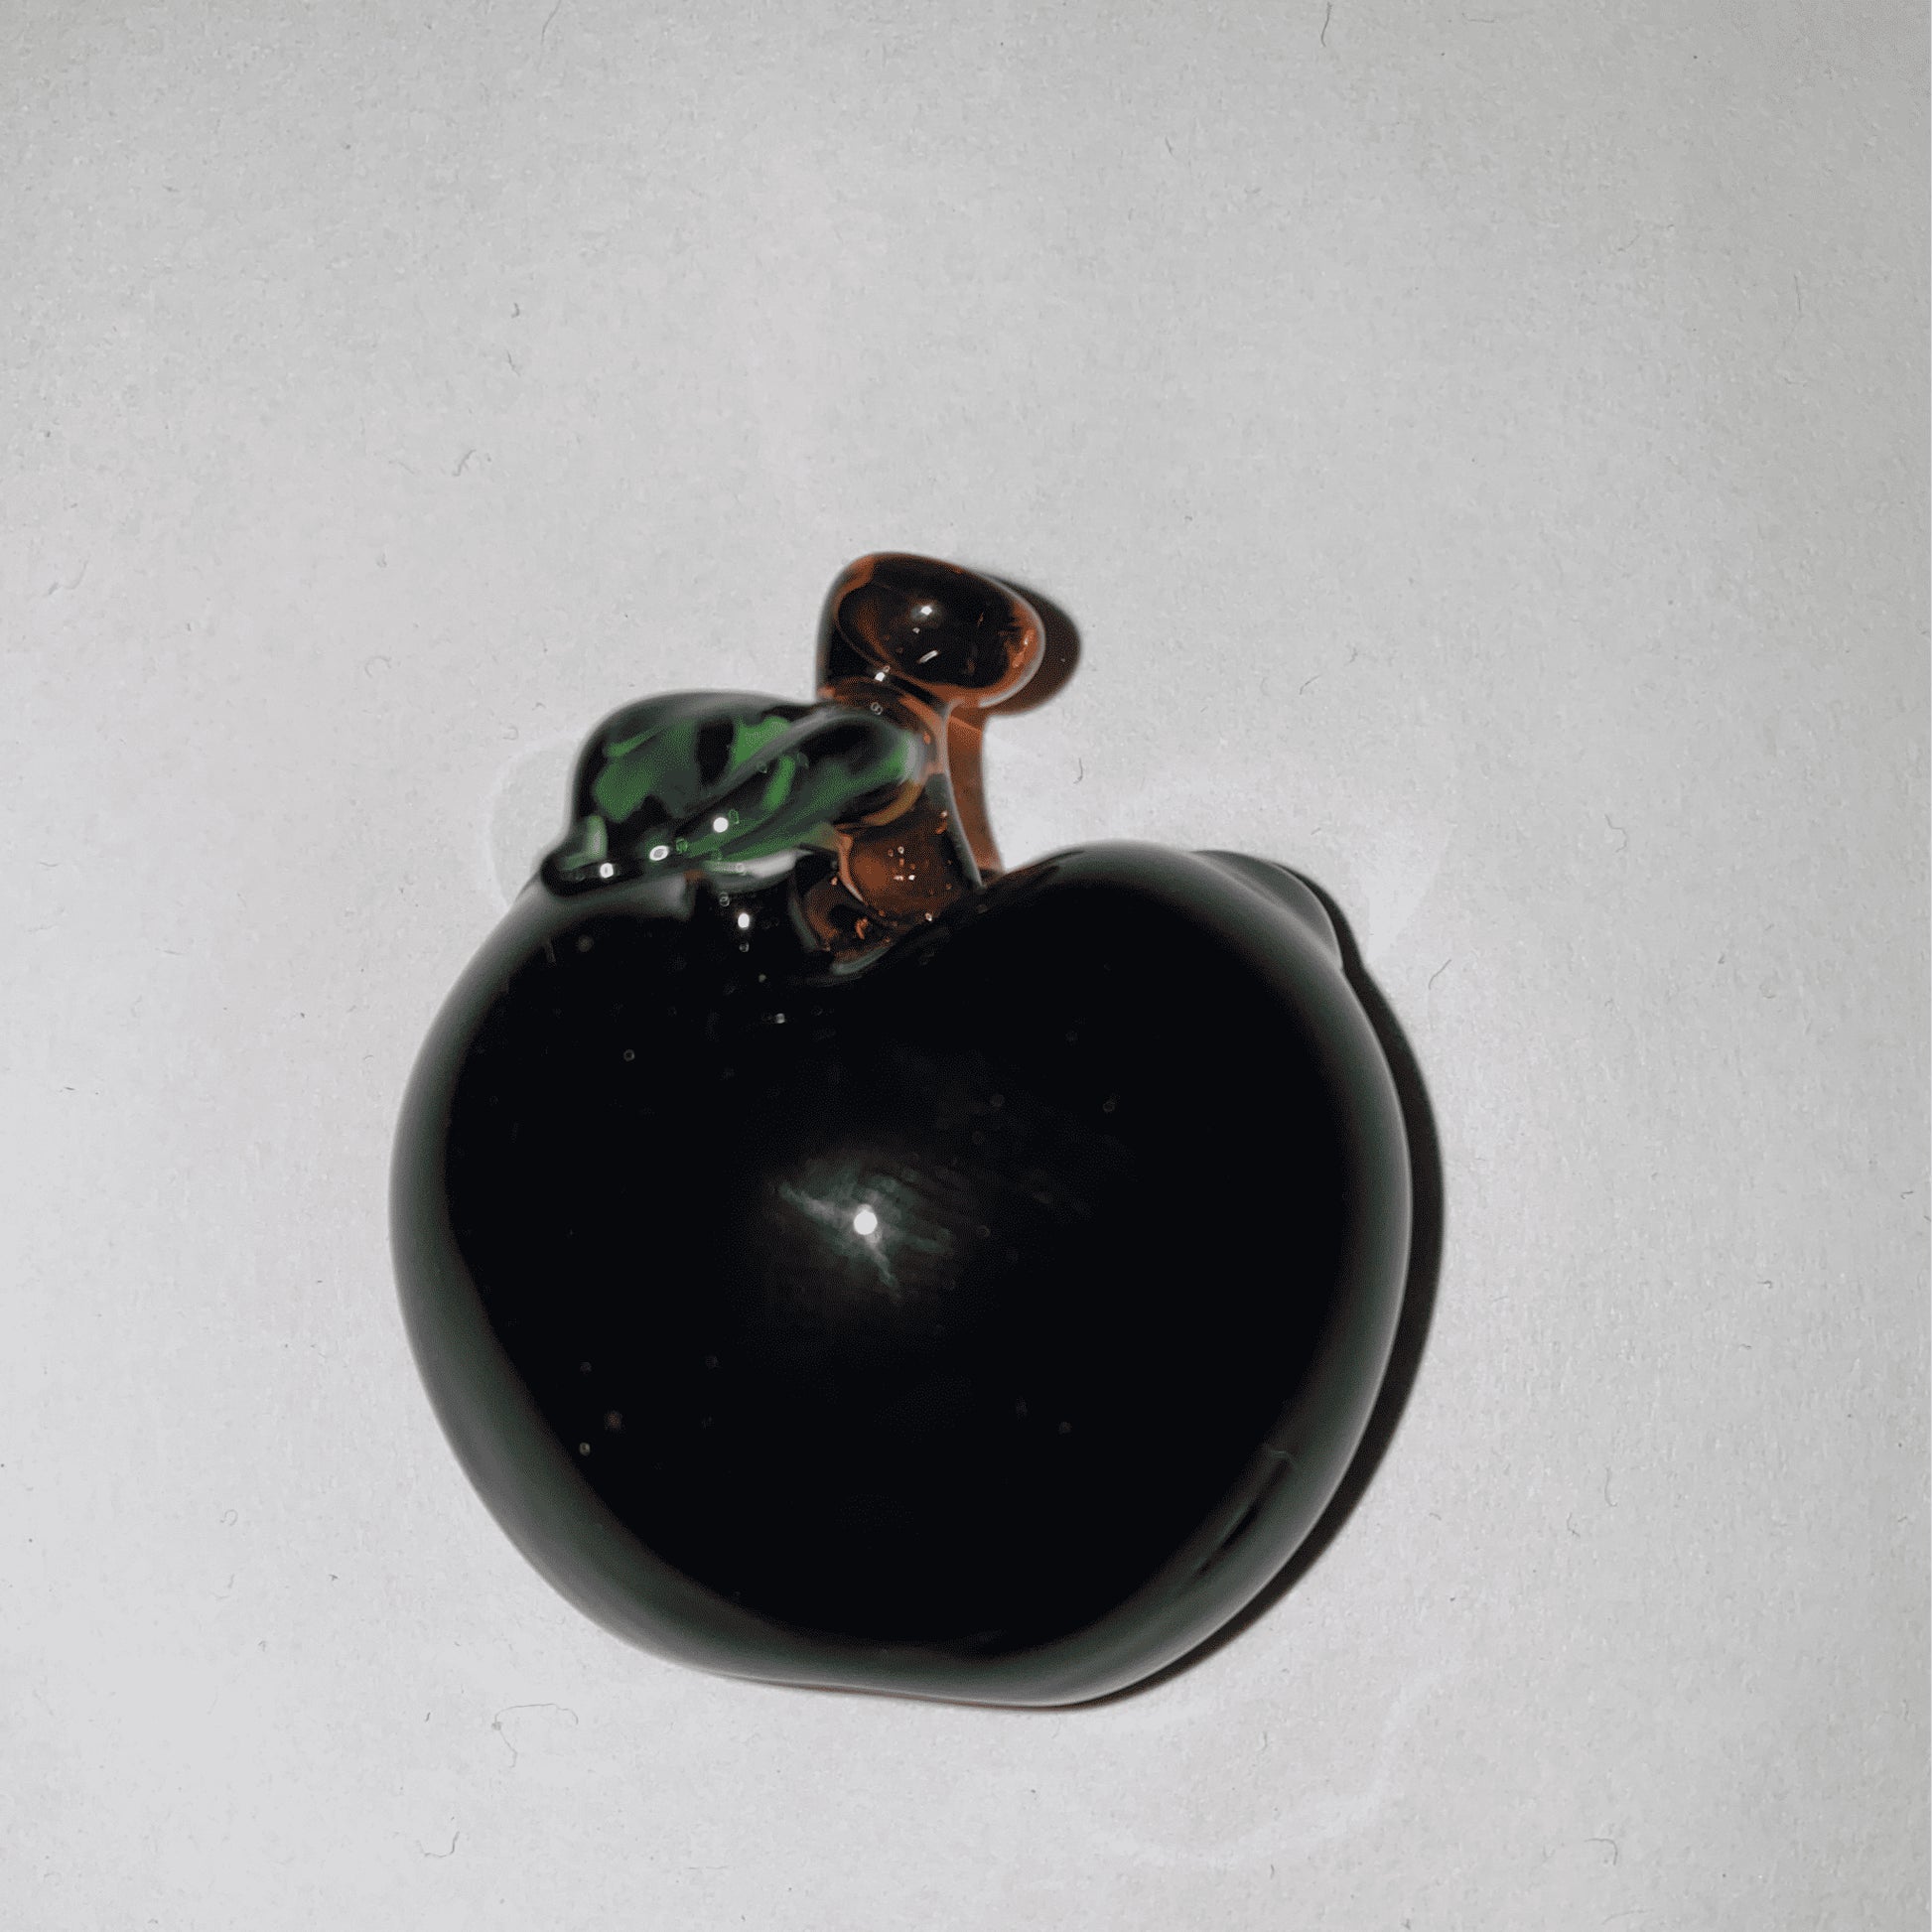 sophisticated glass pendant - Black Apple Pendant by Pouch Glass